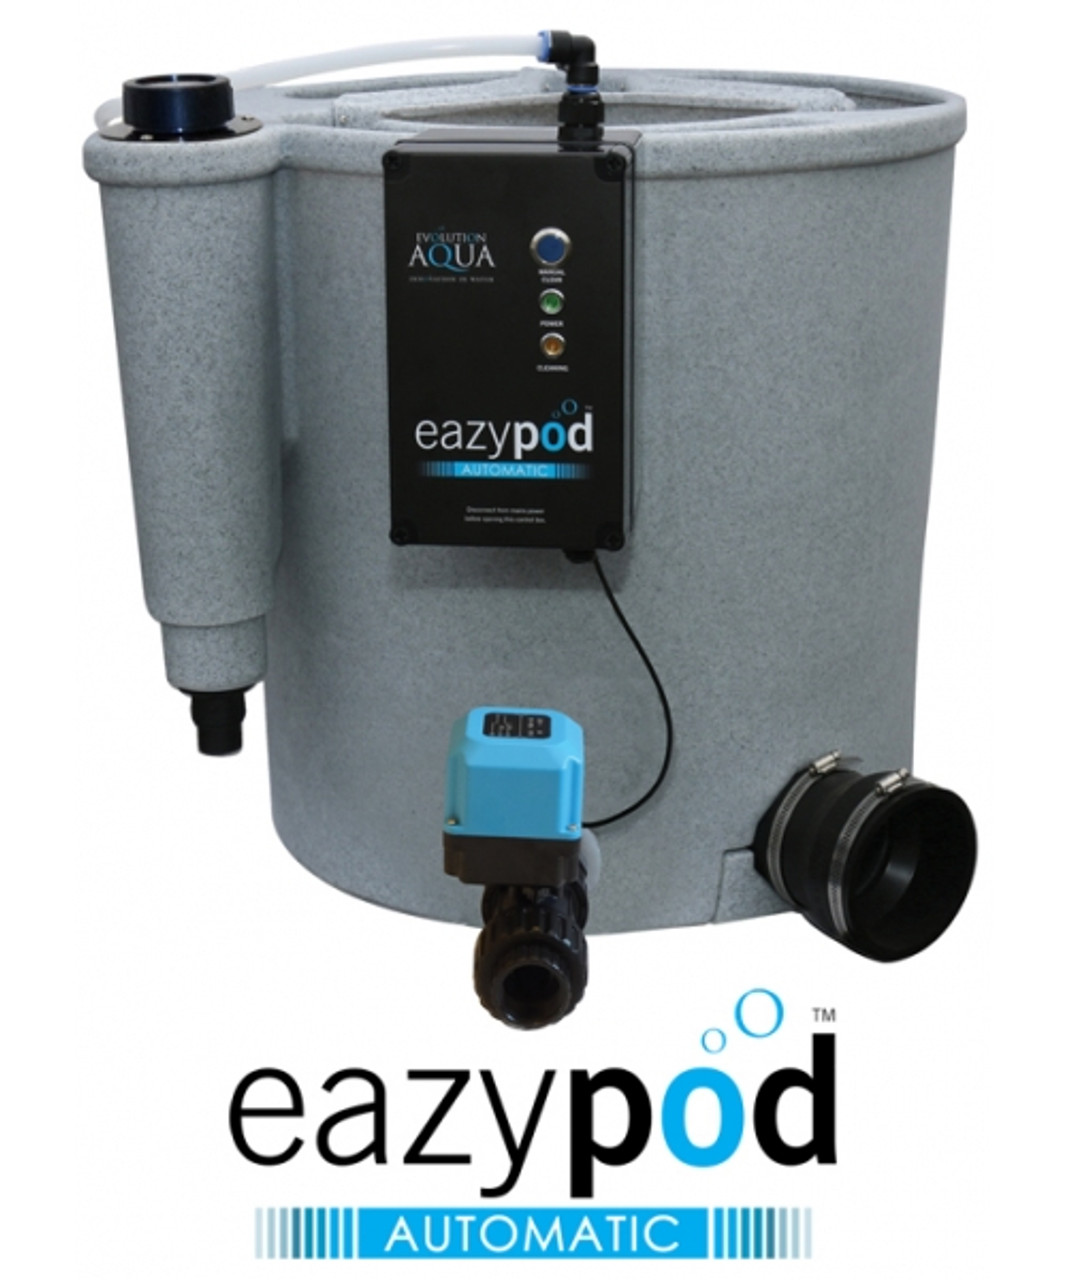 Eazypod Automatic Filter System with Air Pump (FREE SHIPPING)